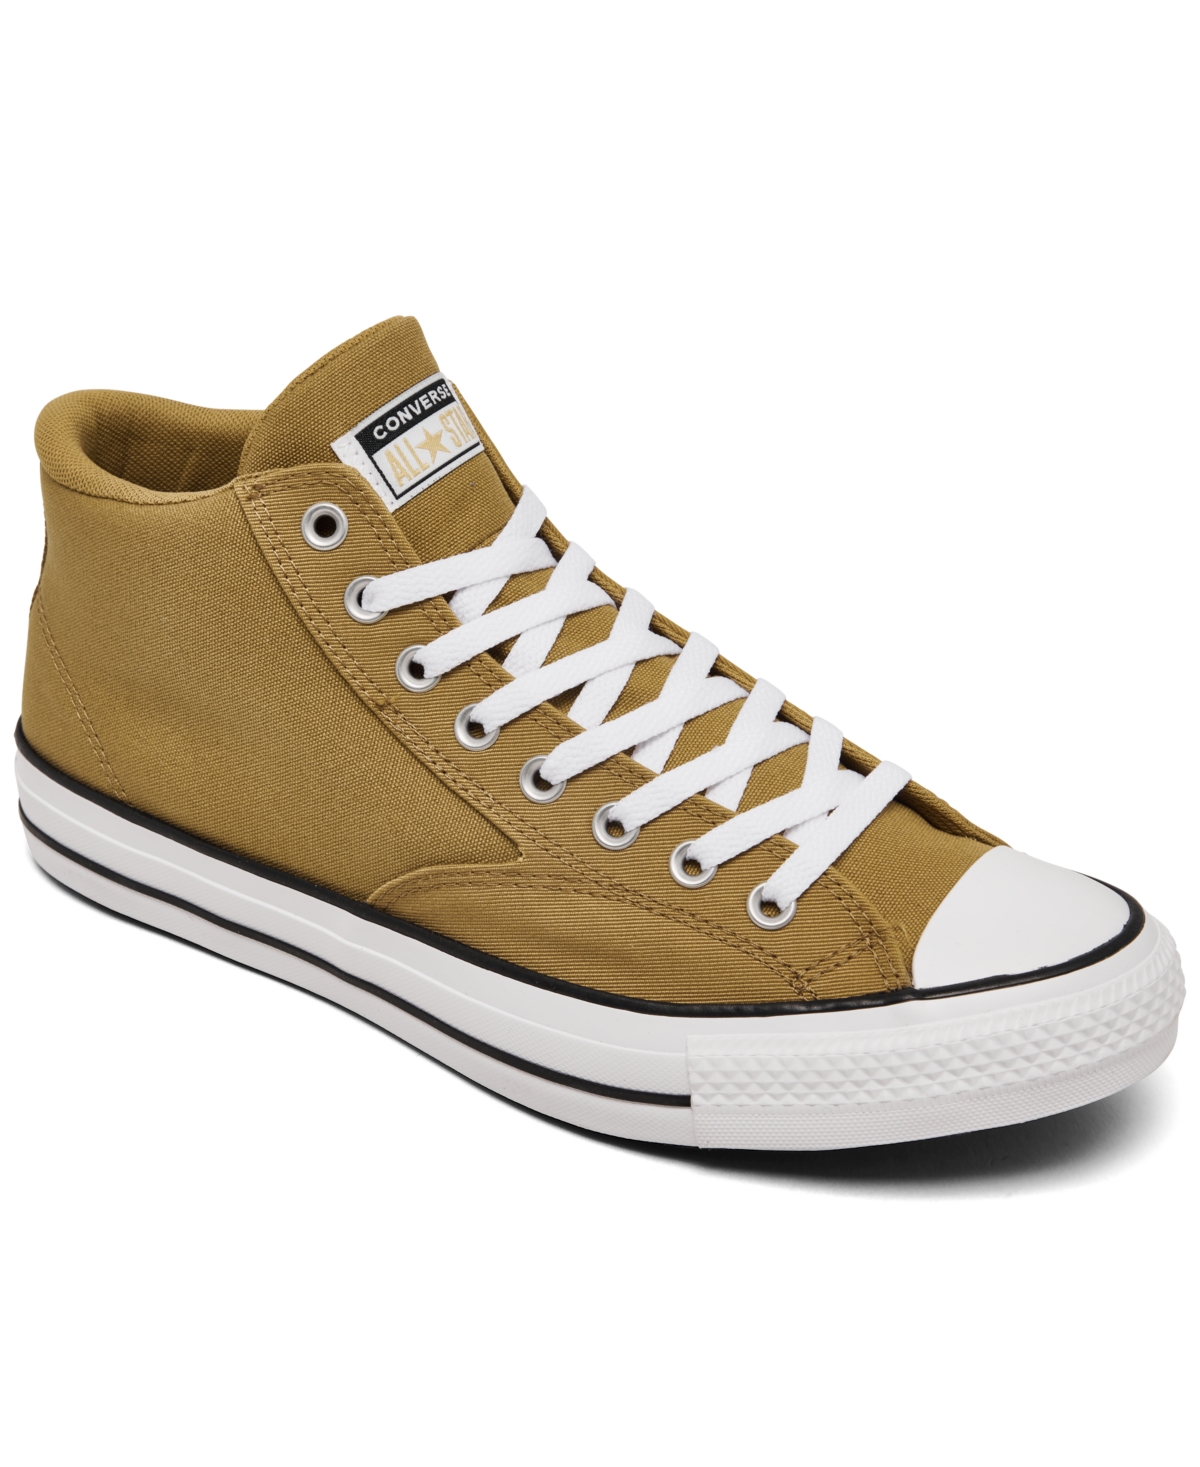 Converse Men's Chuck Taylor All Star Malden Street Casual Sneakers From Finish Line In Trek Tan,white